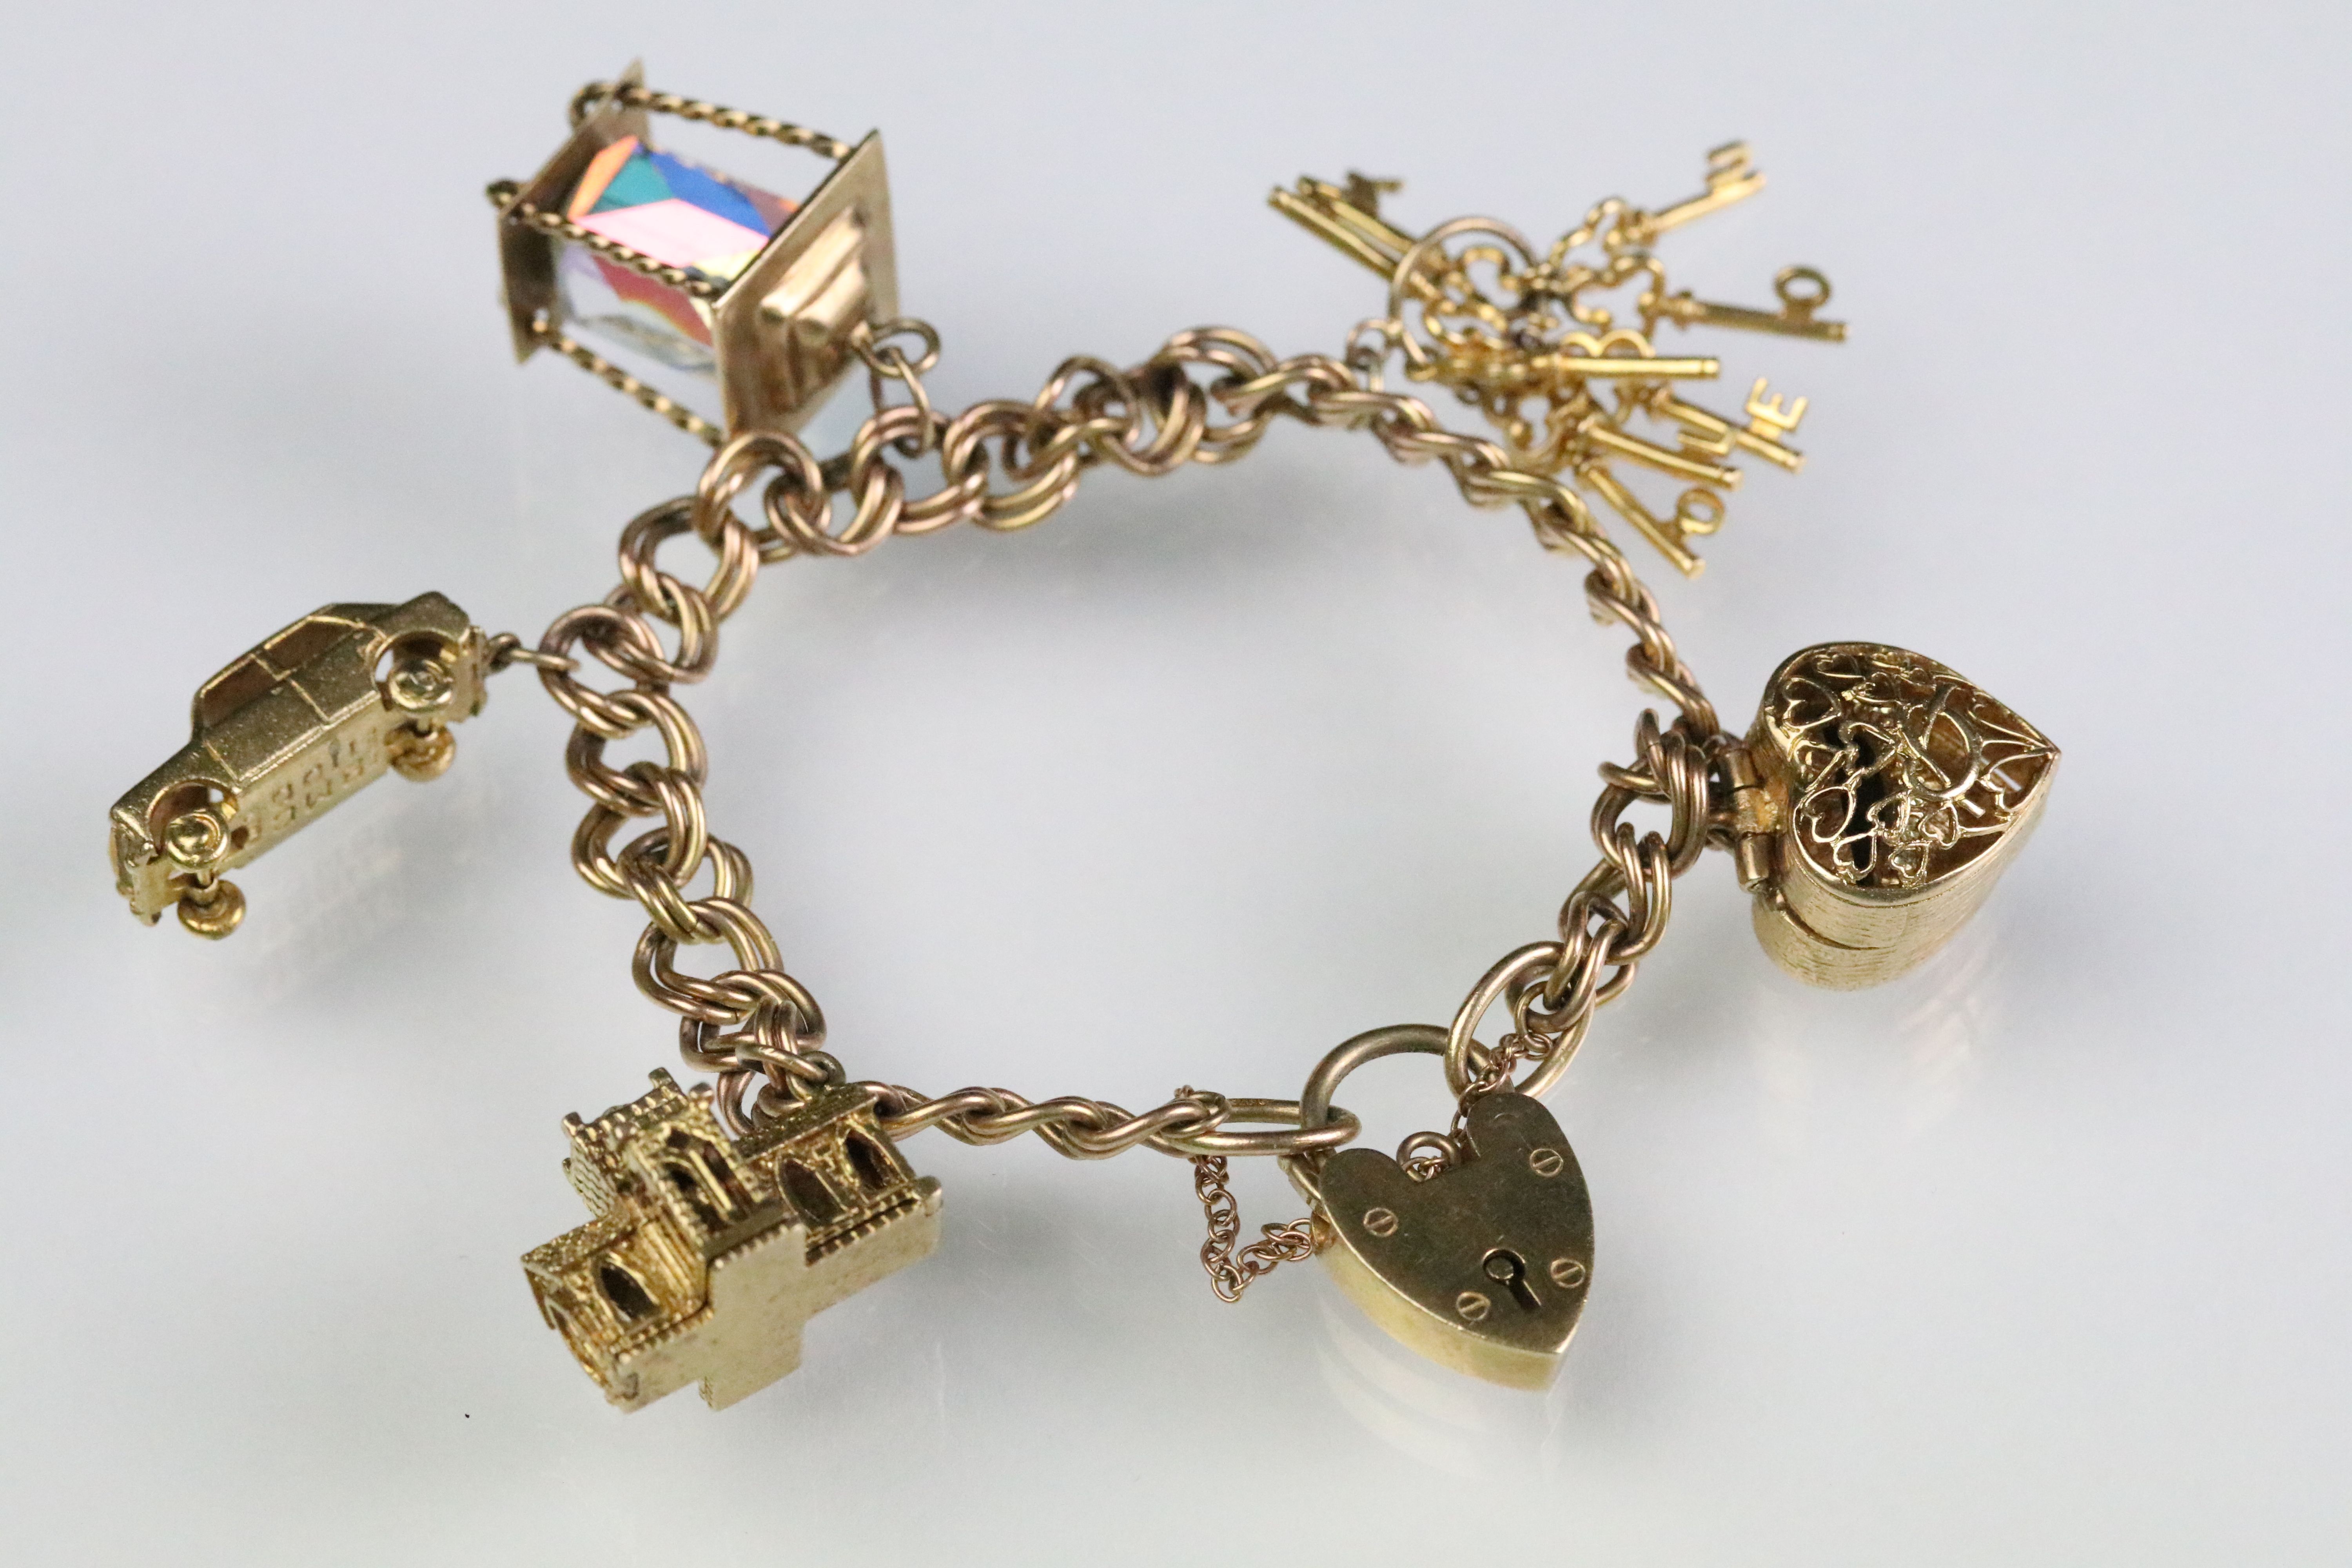 9ct gold hallmarked charm bracelet. The double curb heart lock bracelet mounted with five 9ct gold